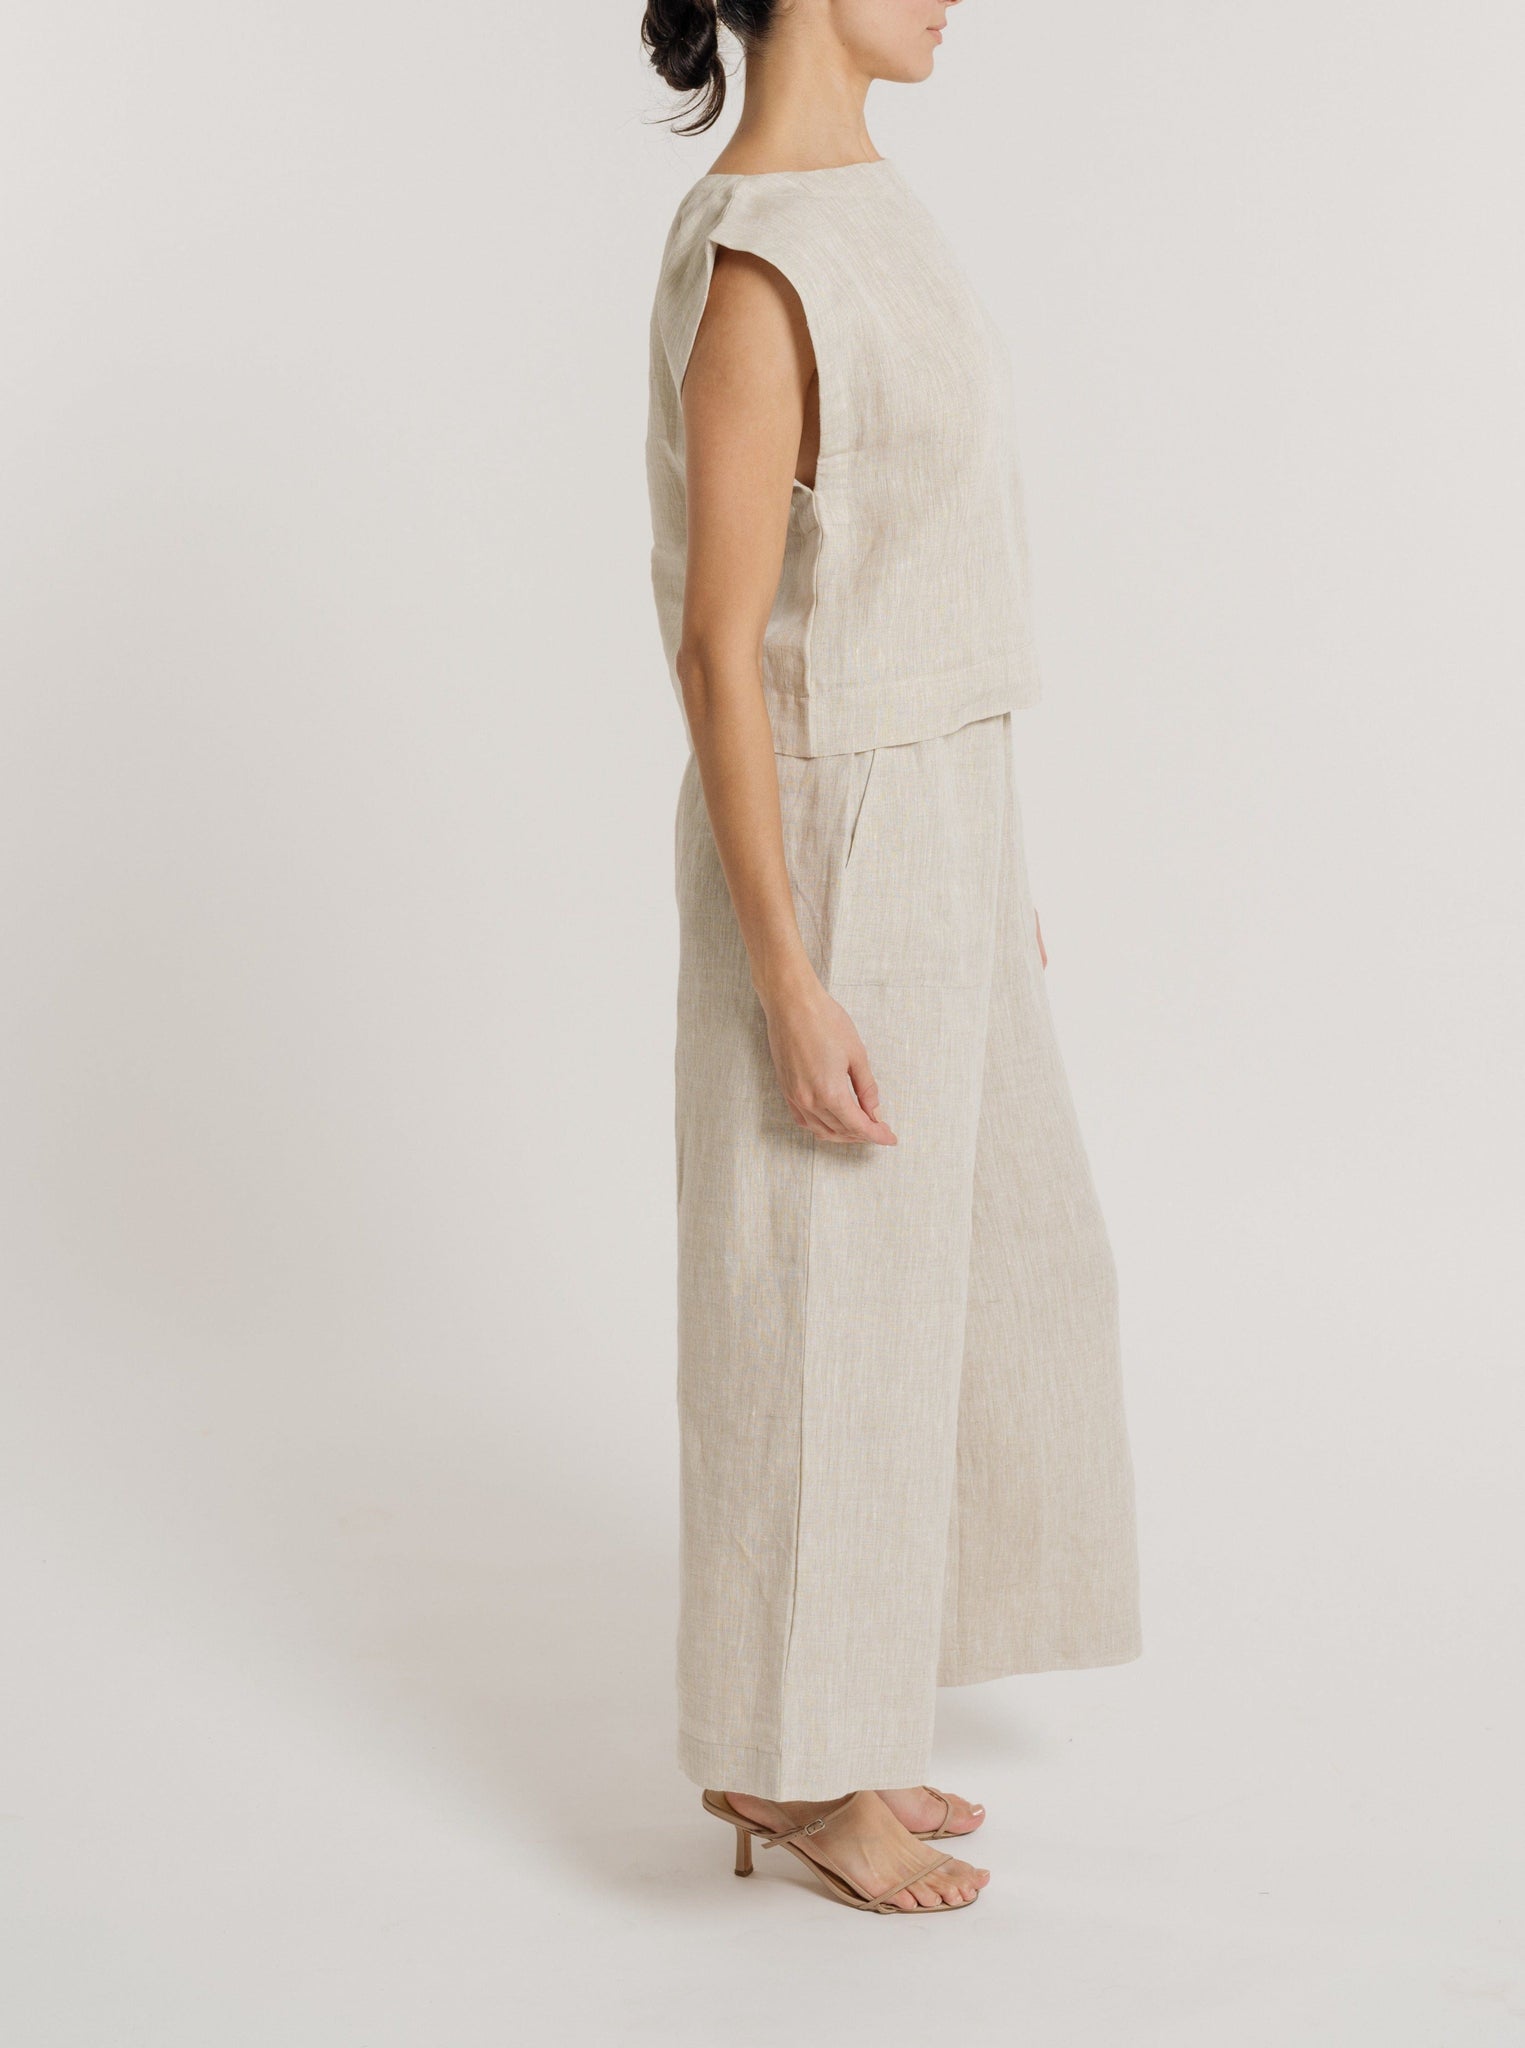 The model is wearing an Everyday Top - Natural Linen jumpsuit.